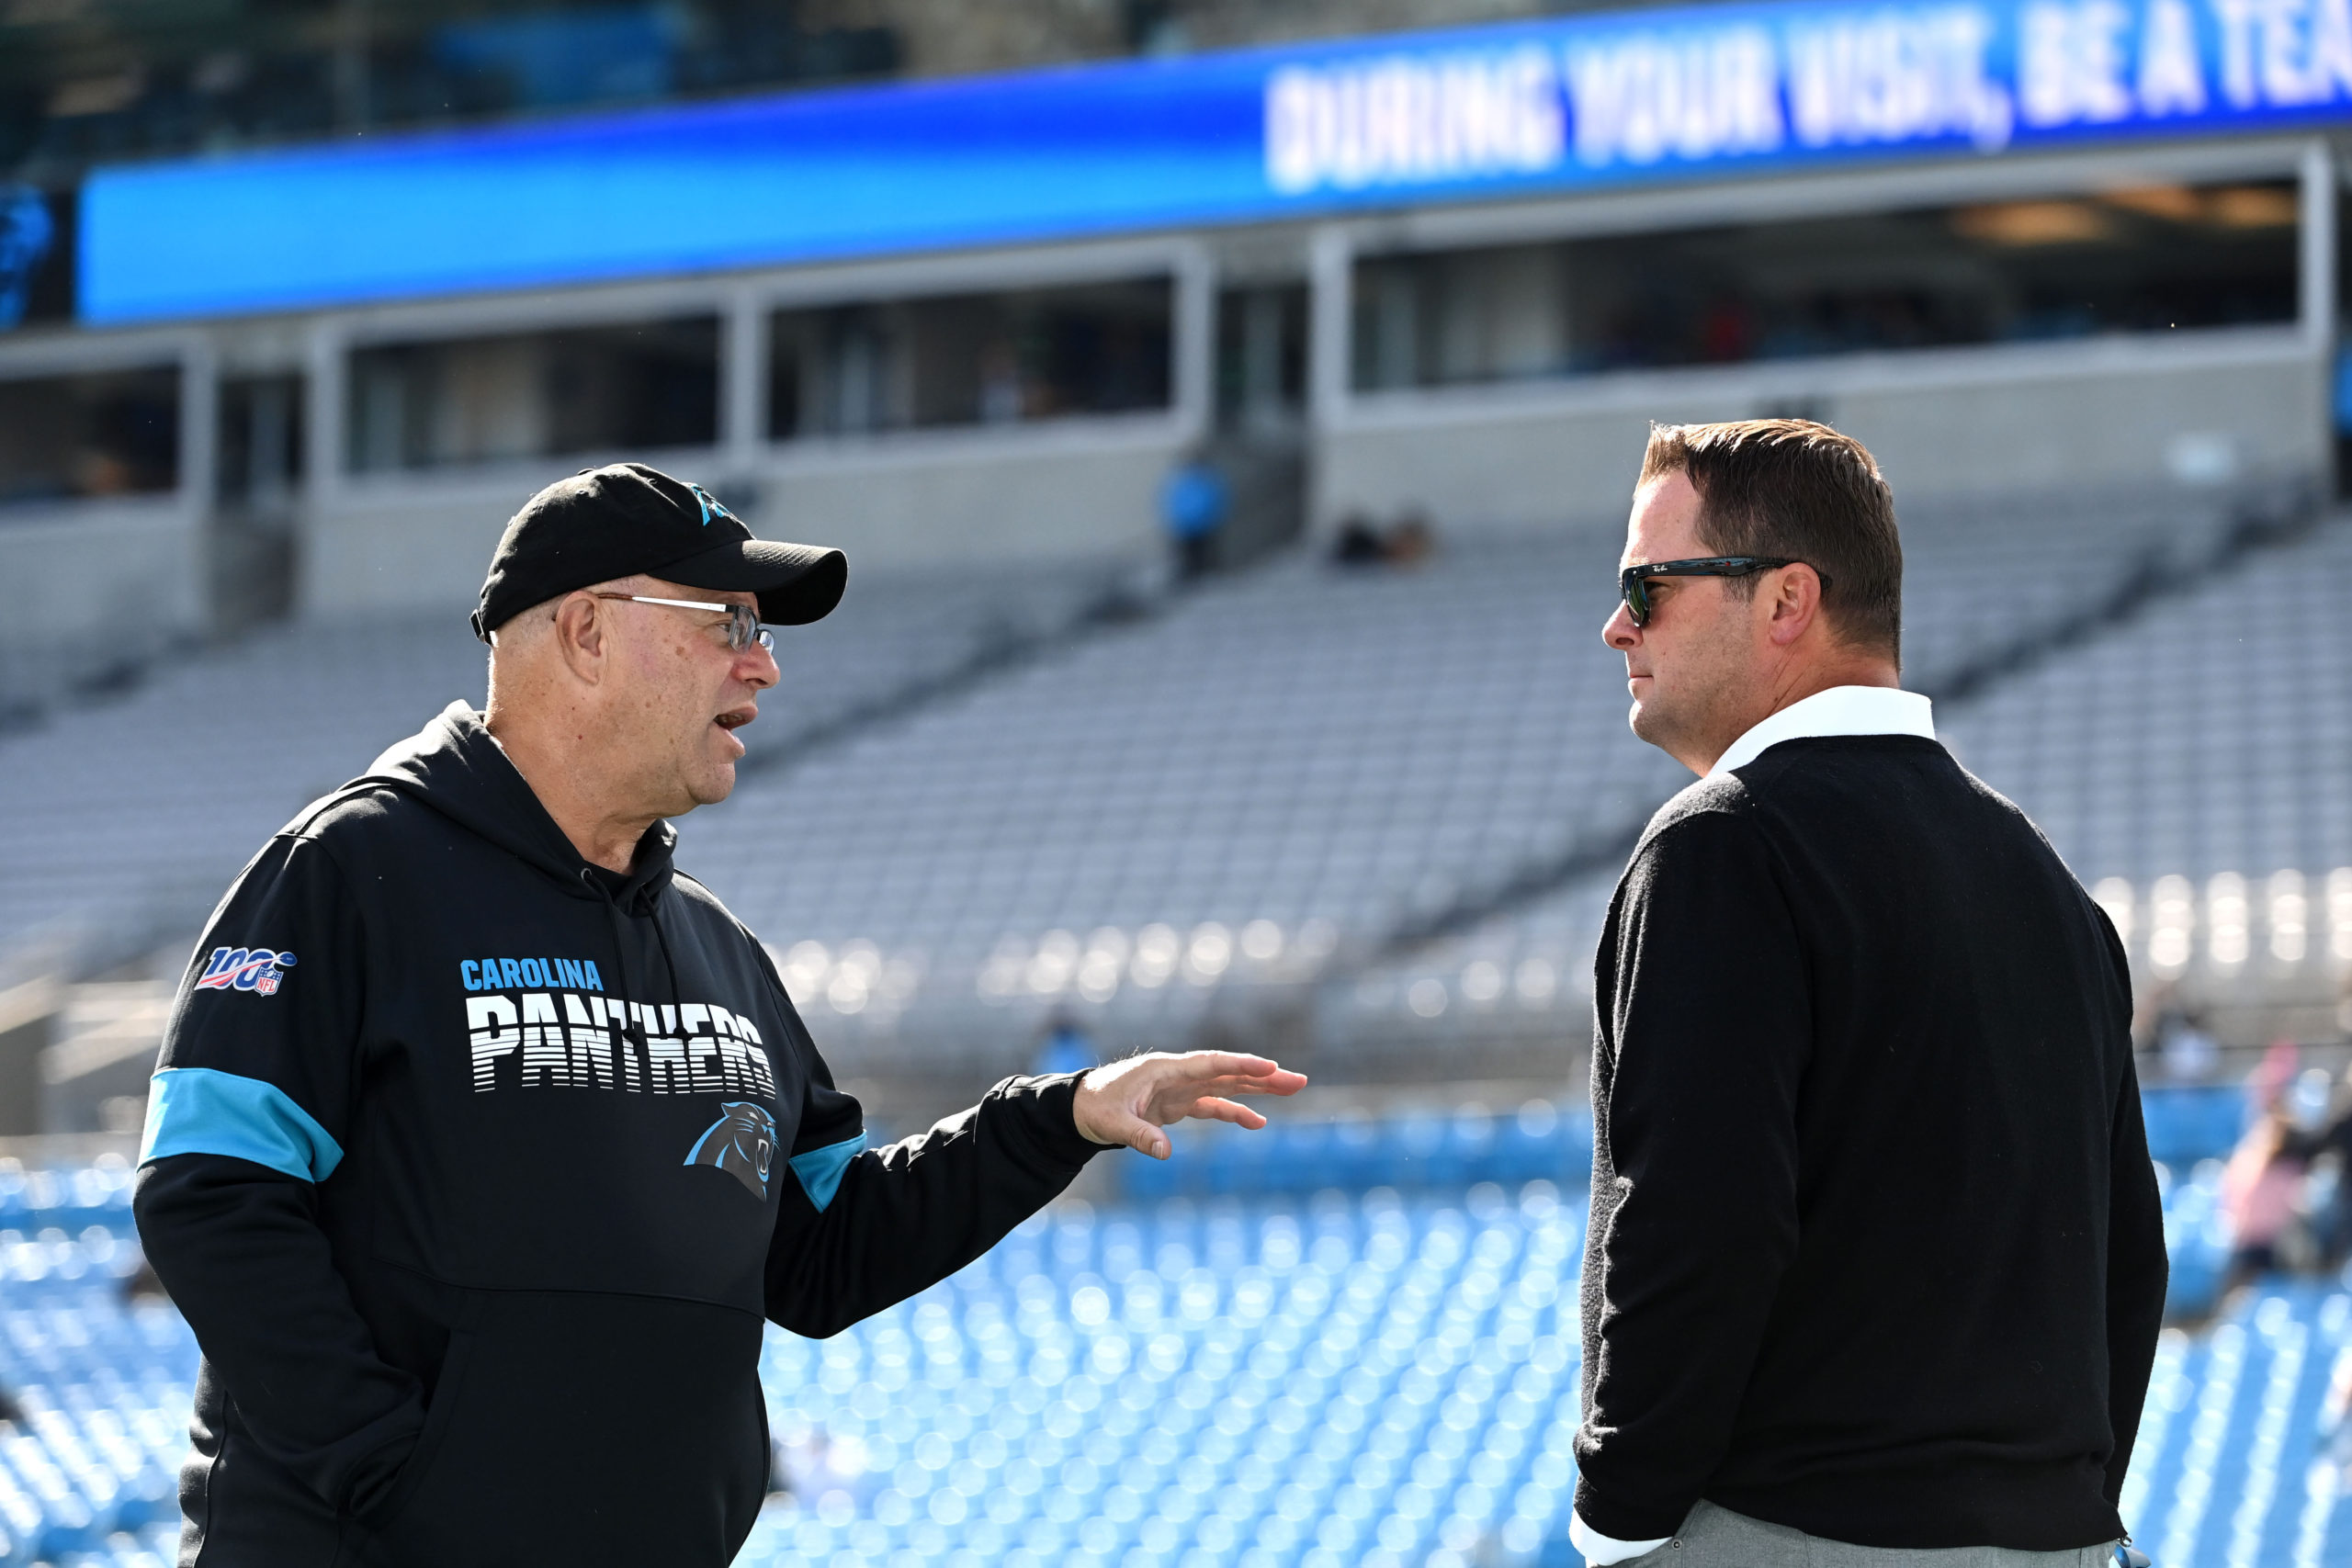 Closer Look at Infrastructure of NFL Franchises with Coaching Openings